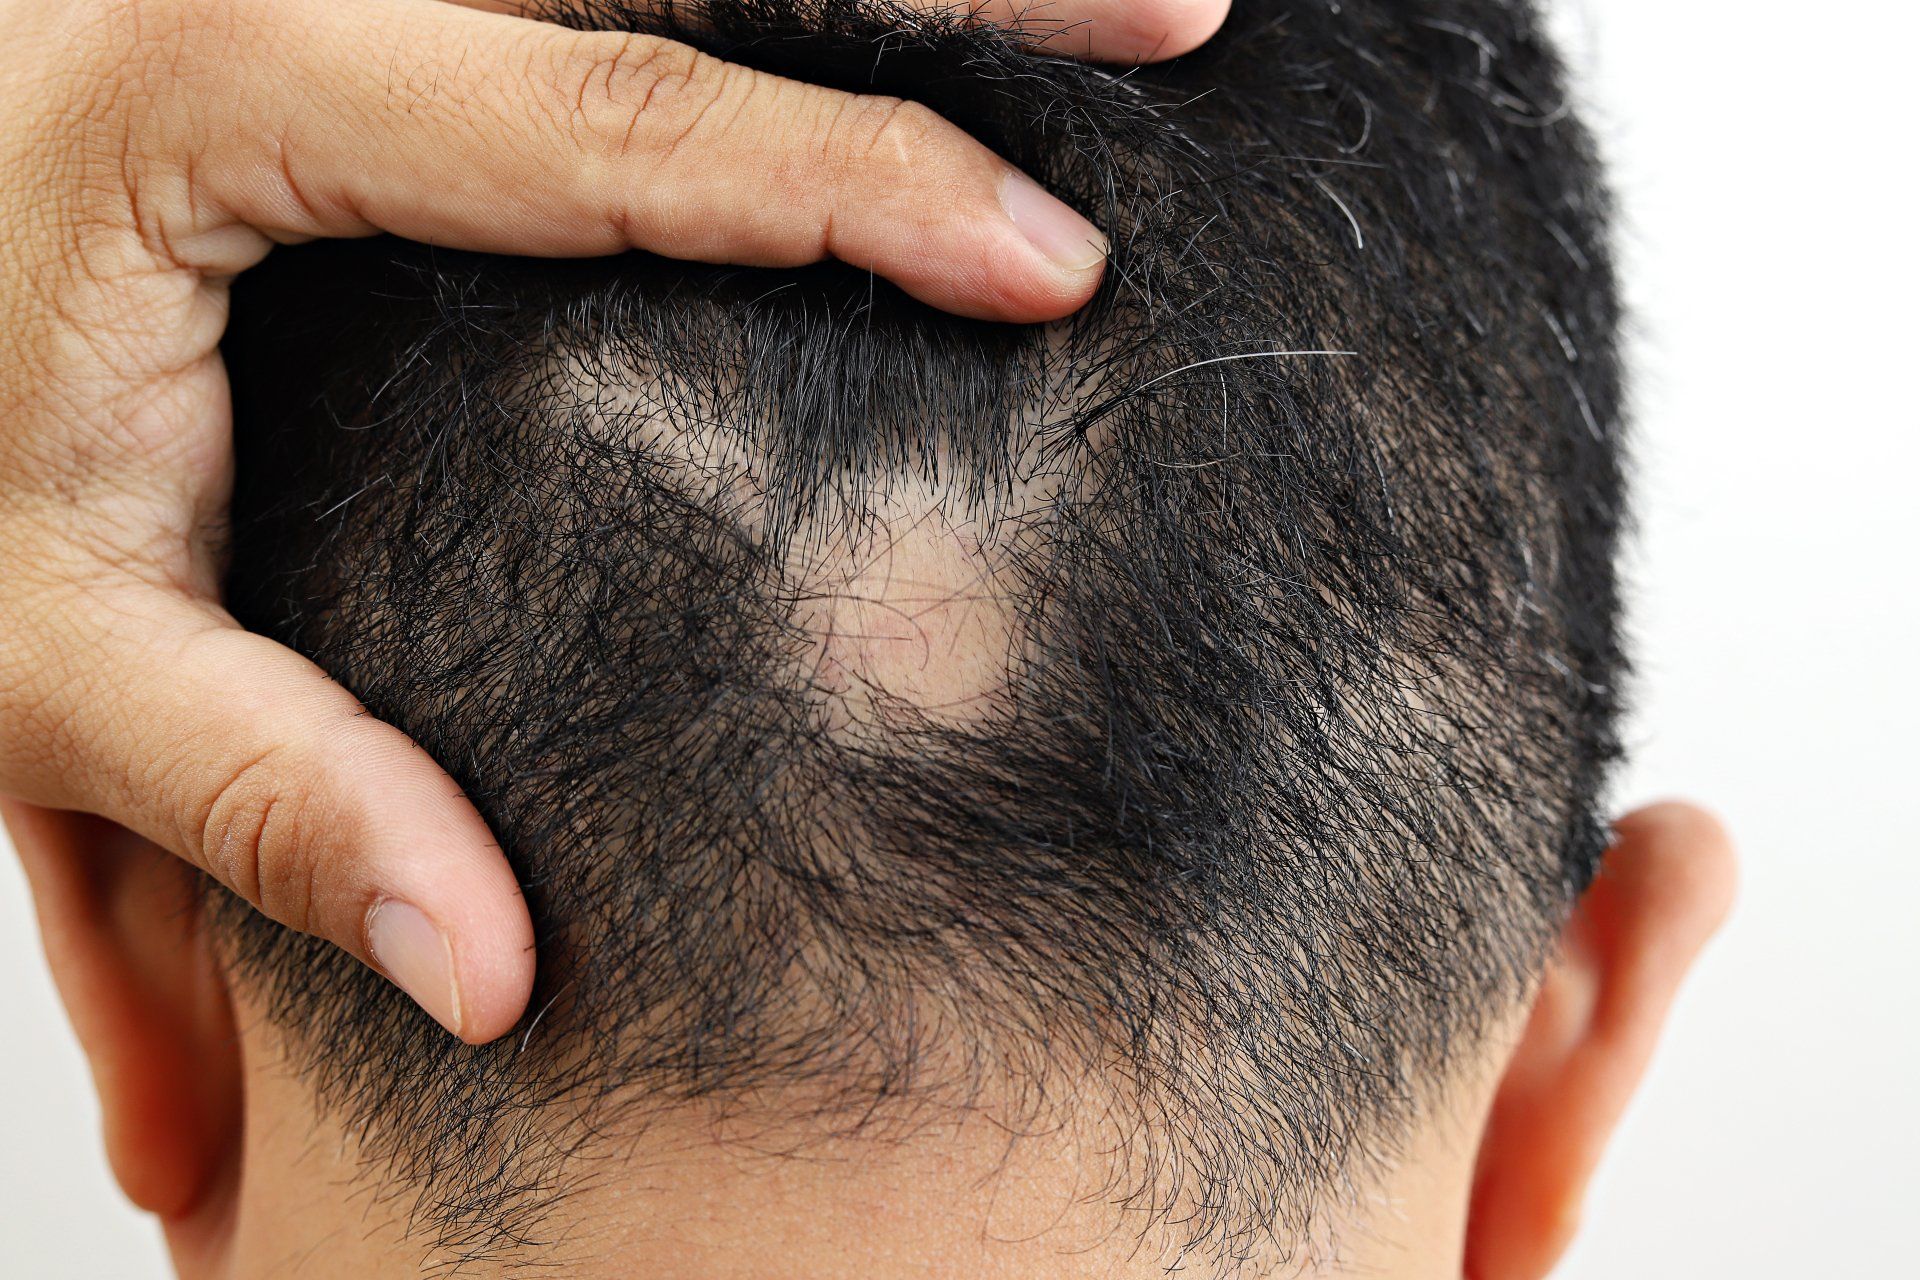 Back of the head of a man with alopecia areata (a type of hair loss)